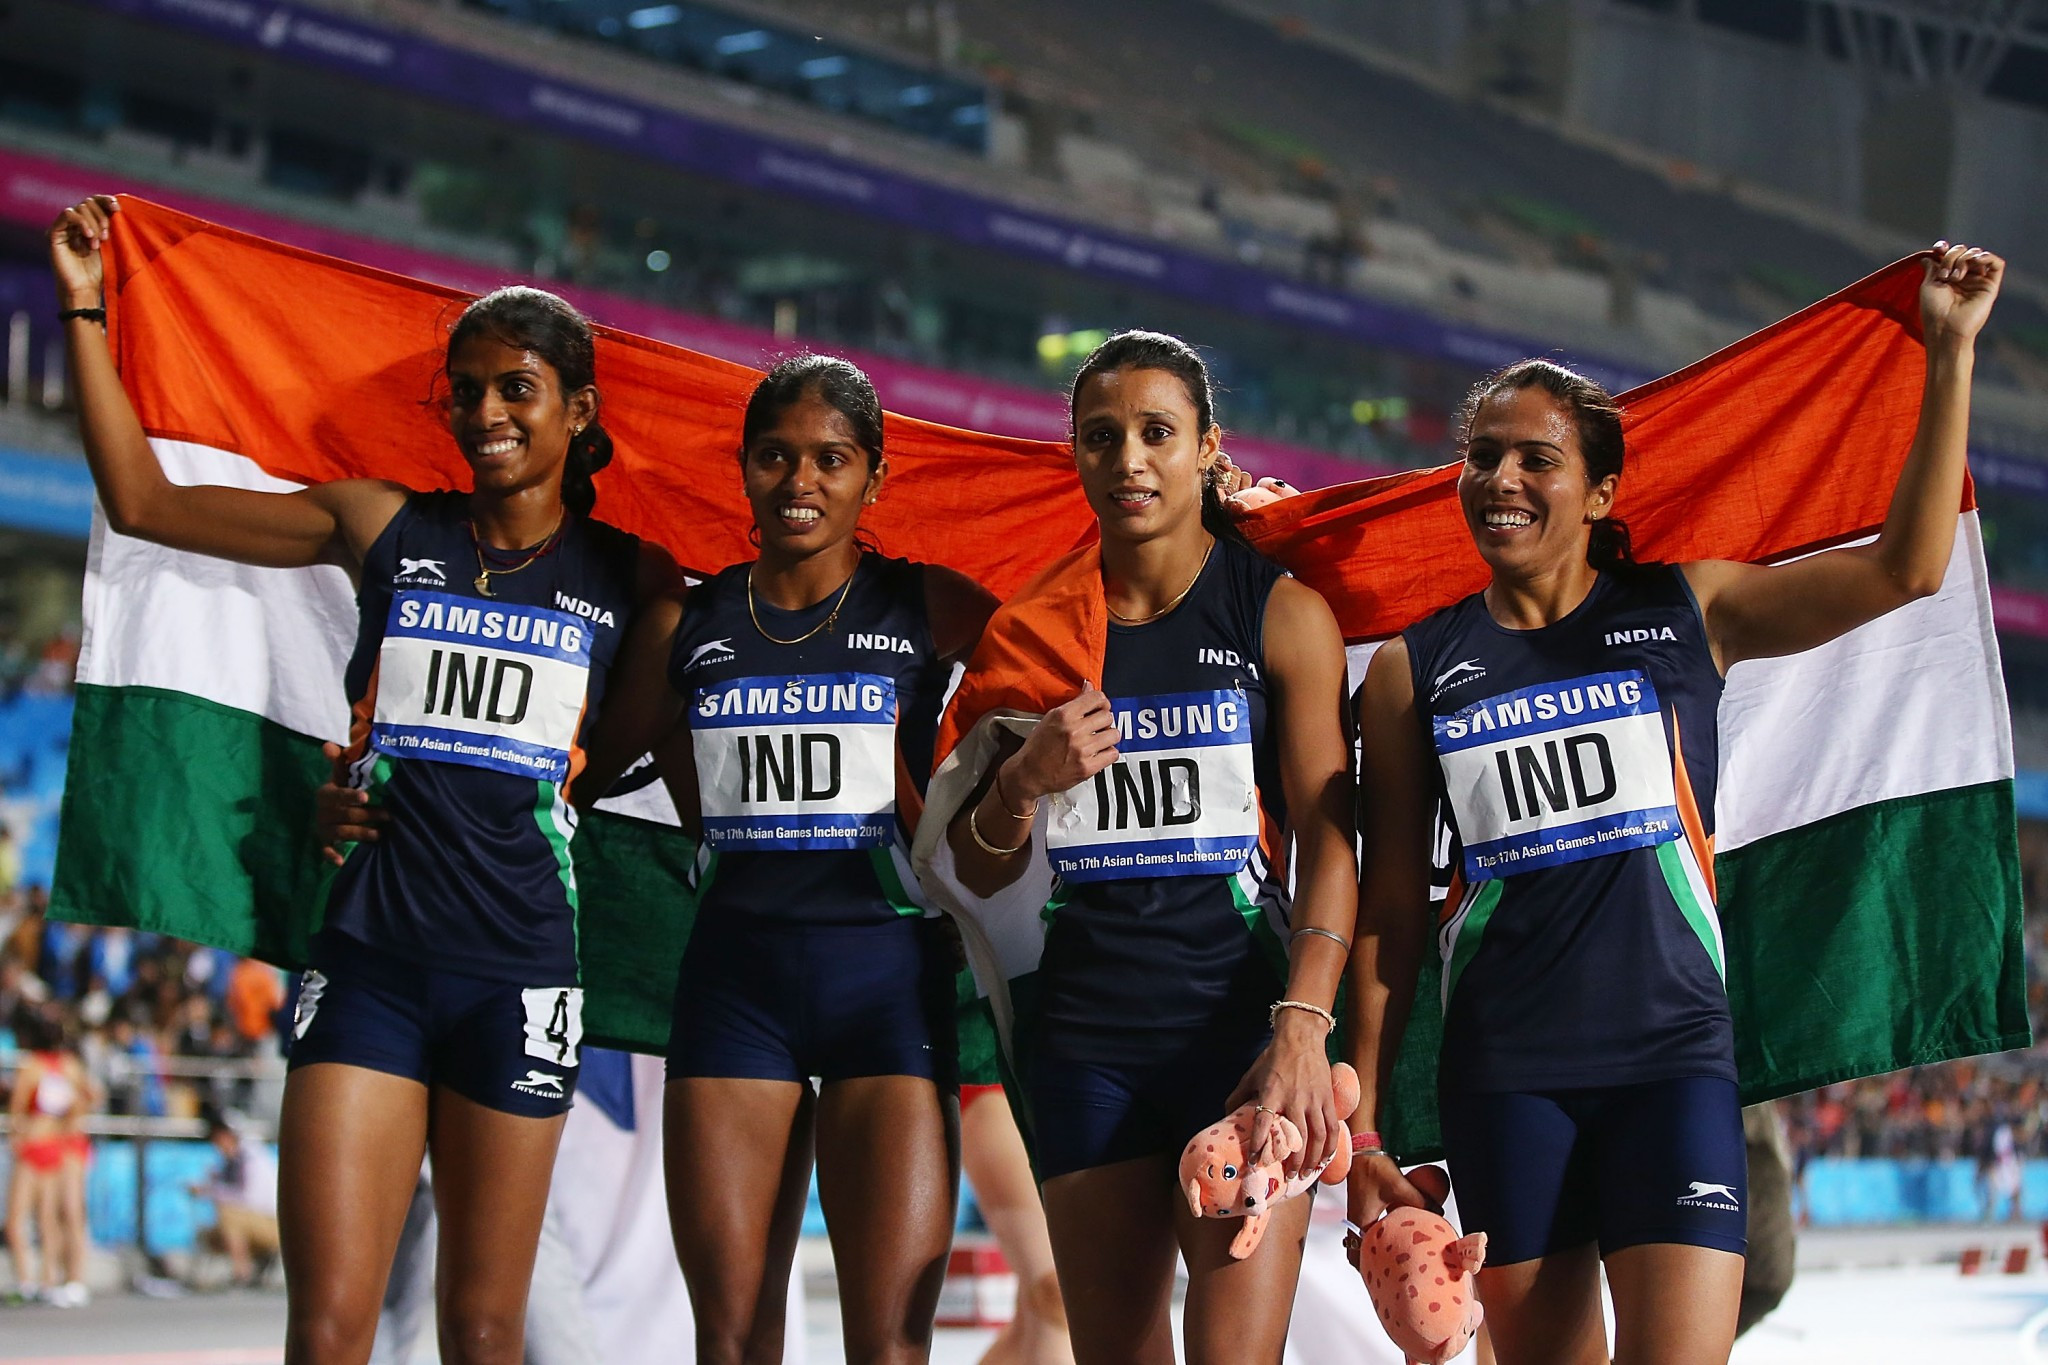 Priyanka Pawar, left, was a part of India's gold medal winning 4x400m relay team at Incheon 2014 ©Getty Images